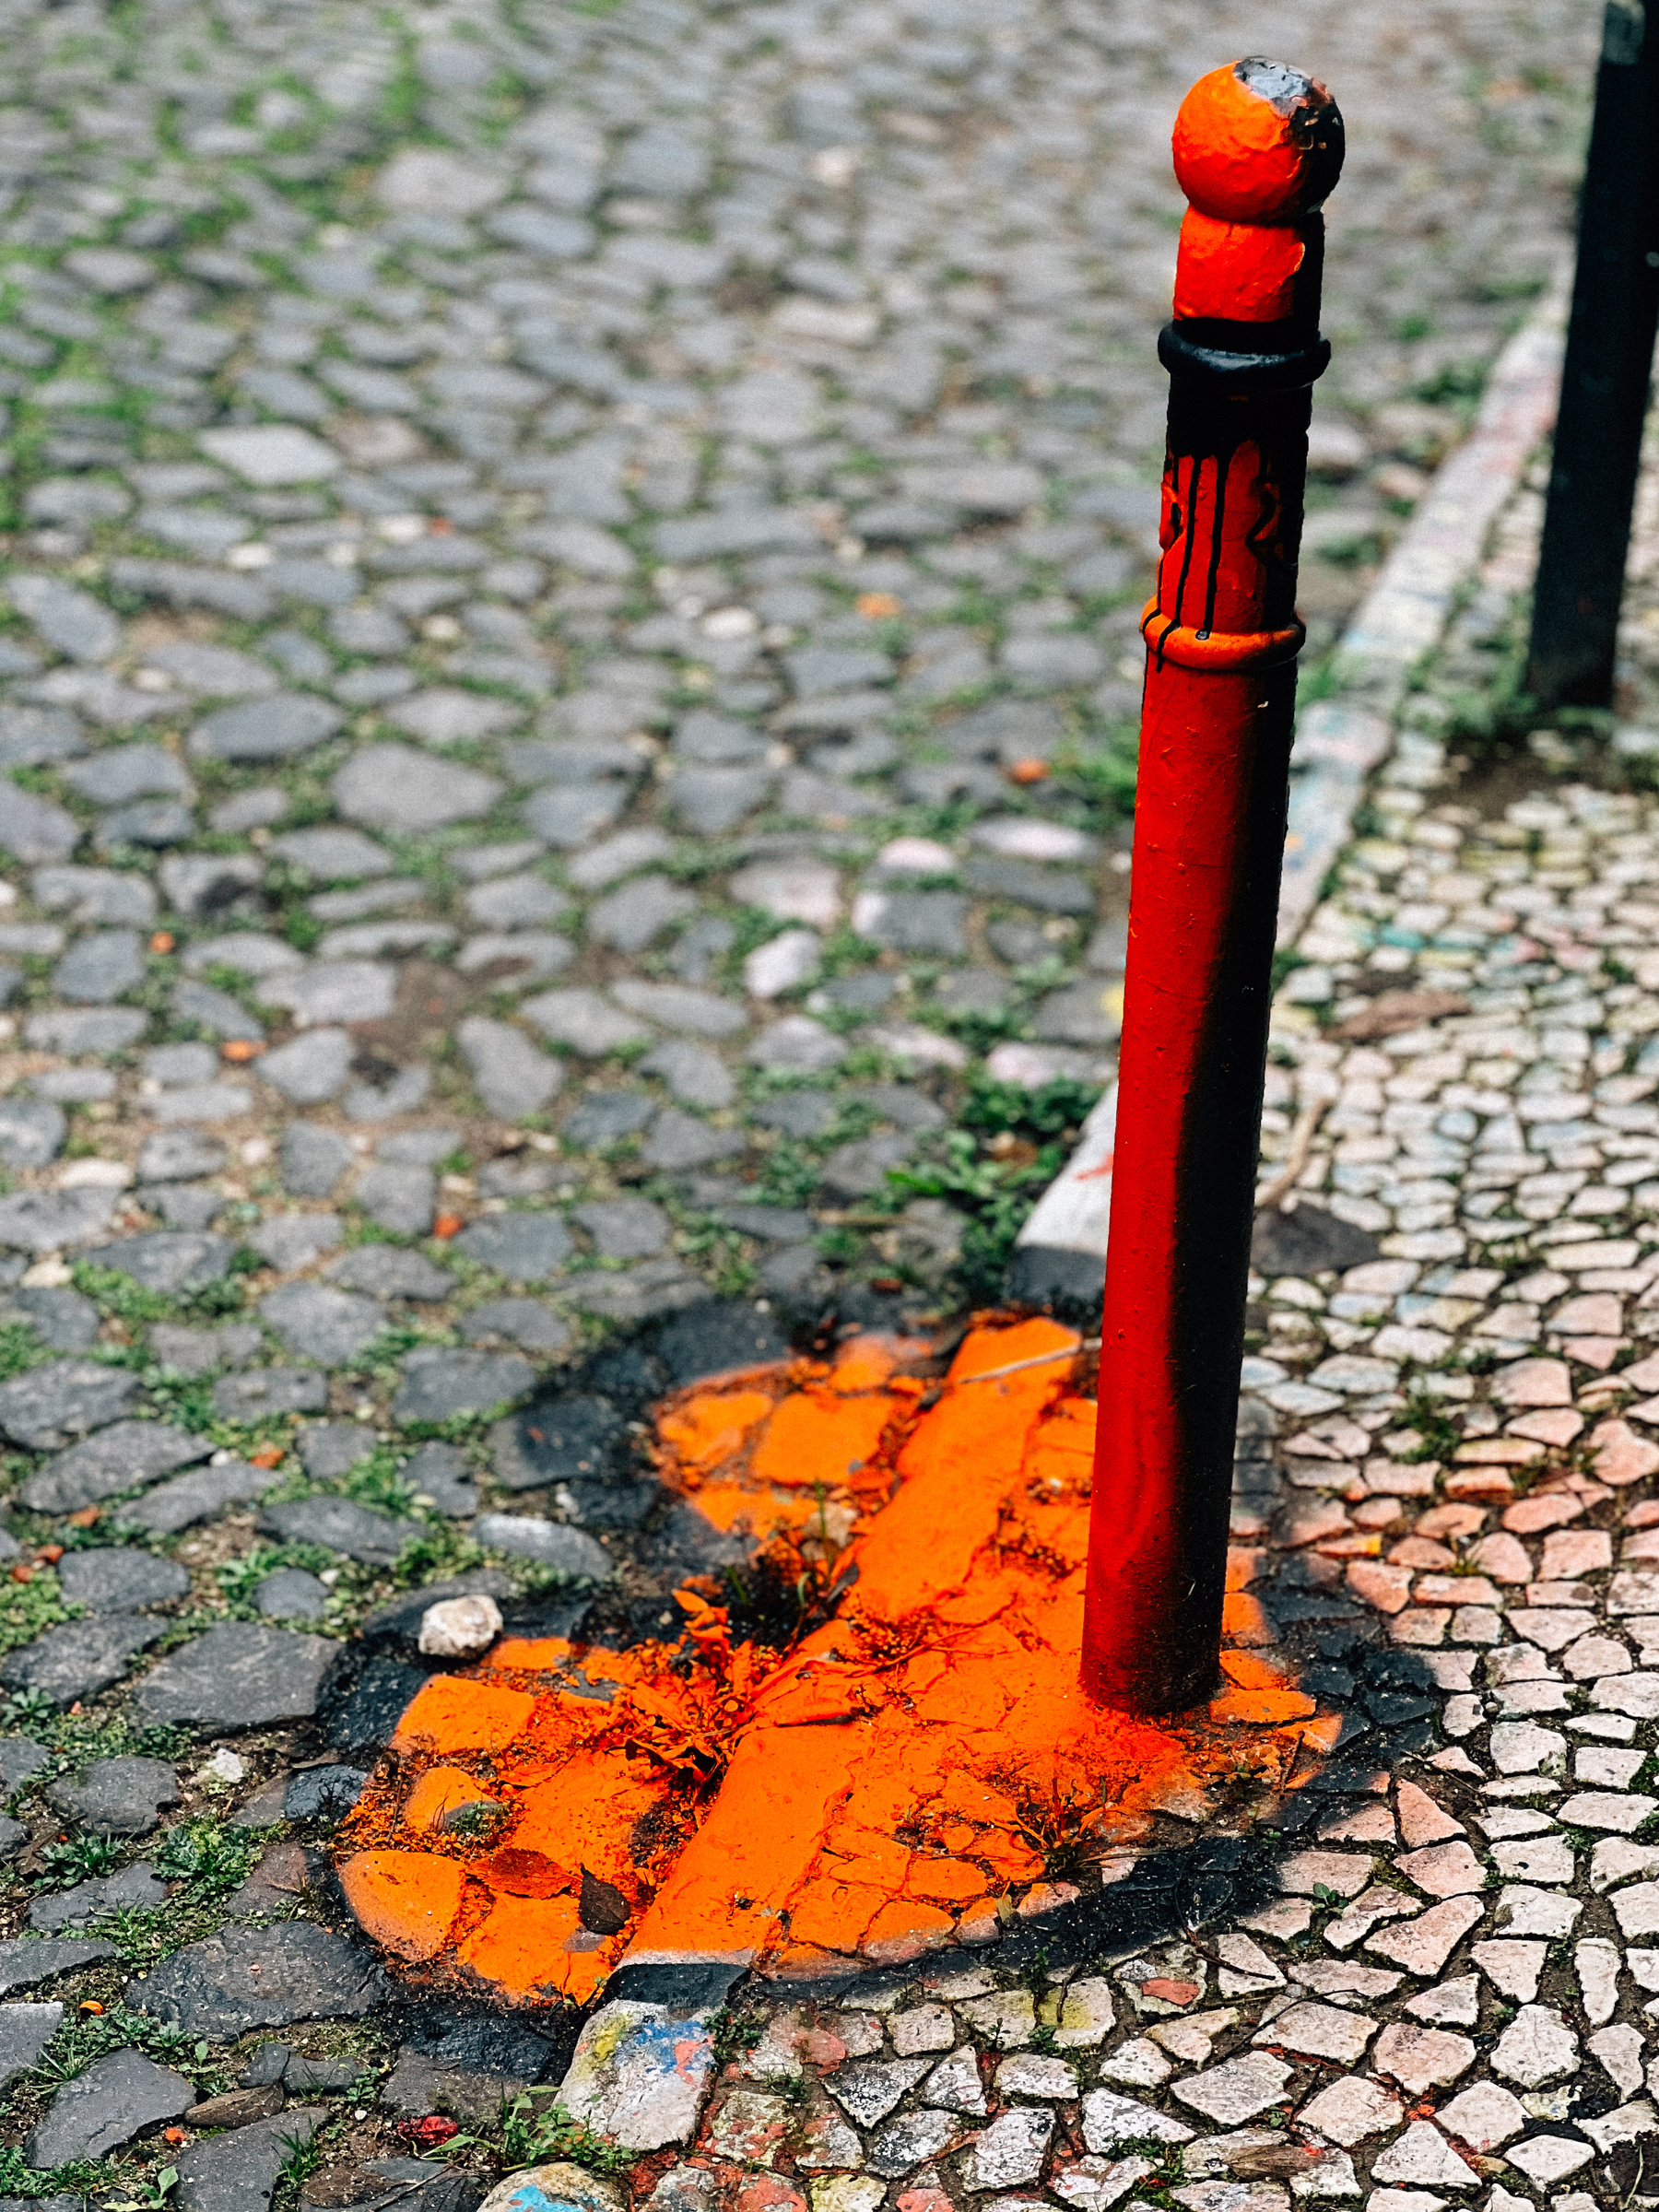 An orange painted metal bollard on a cobblestone street with orange paint splashed at its base.